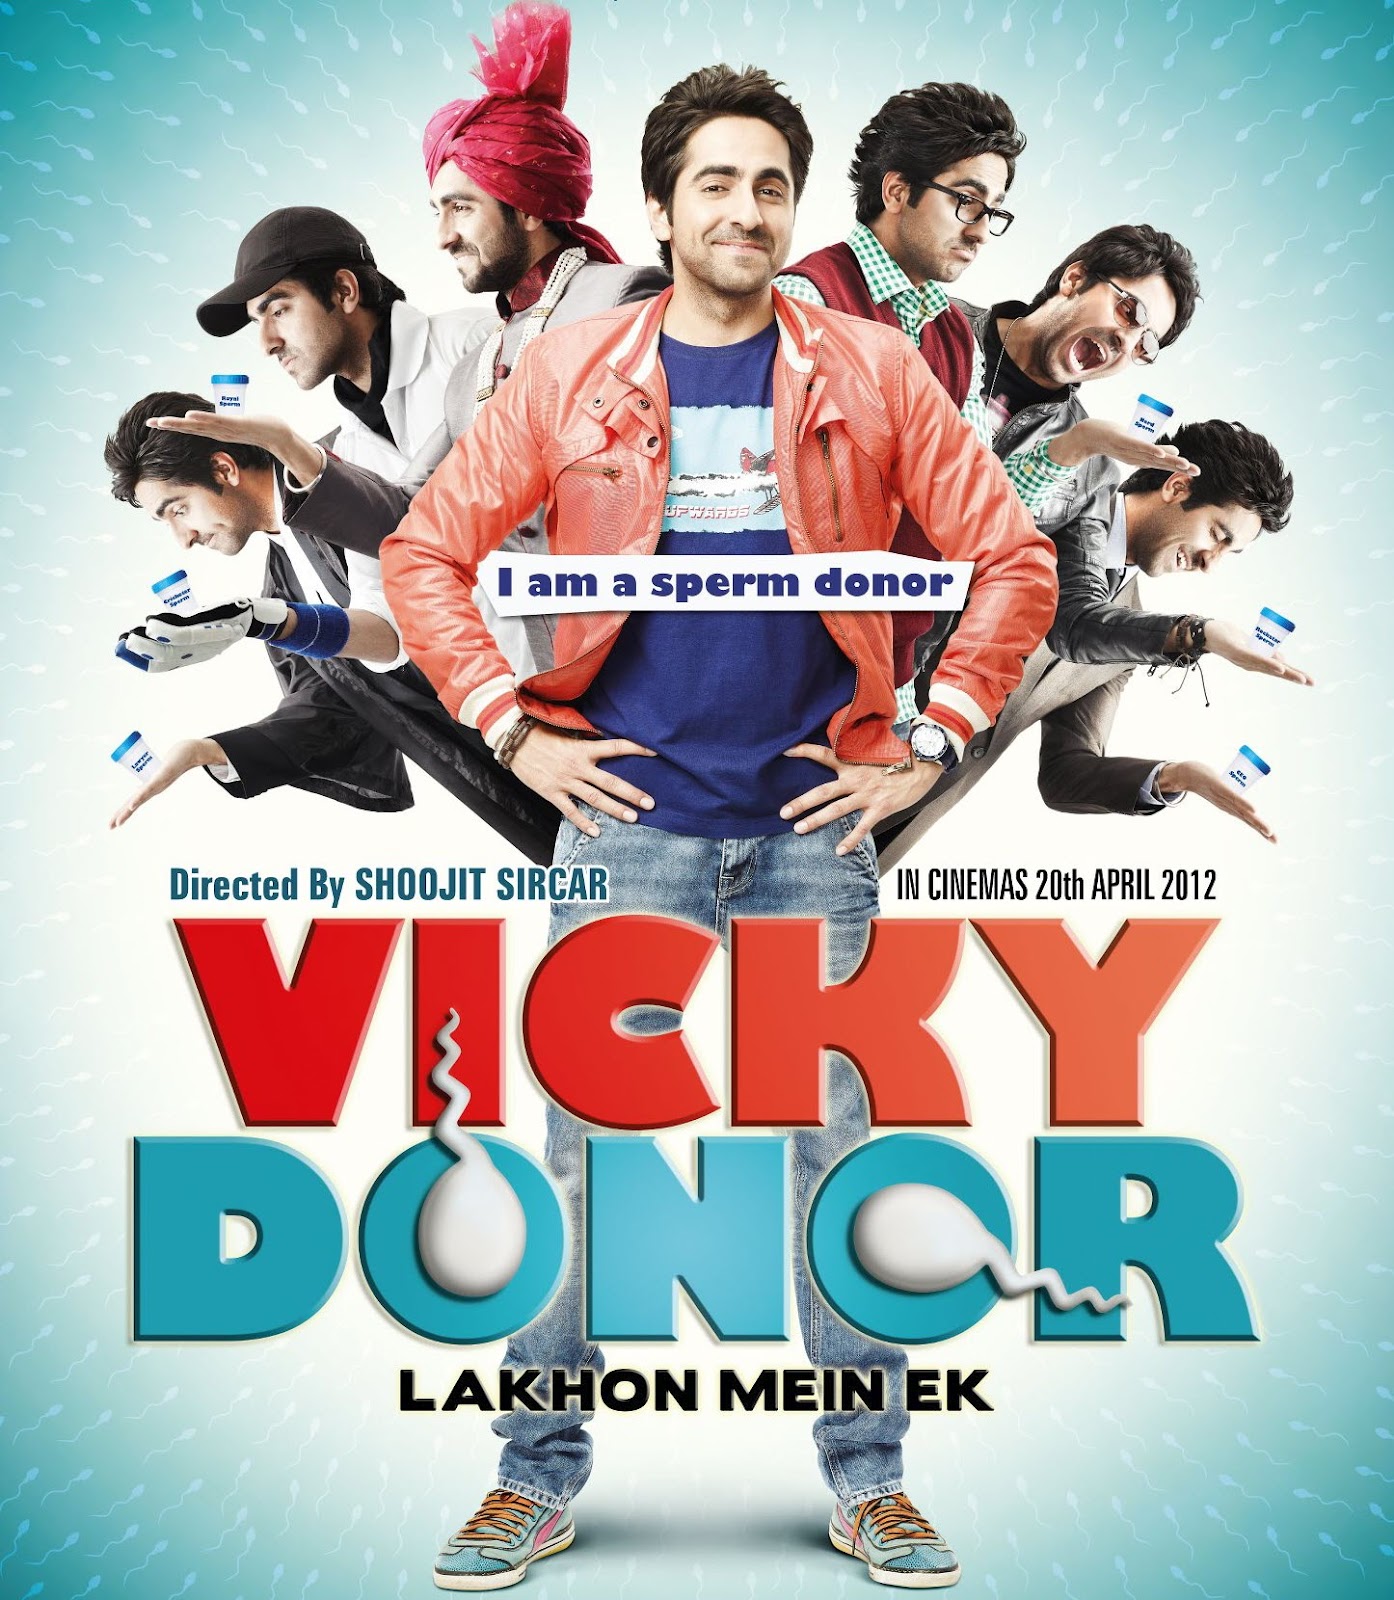 Vicky Donor Bollywood film poster